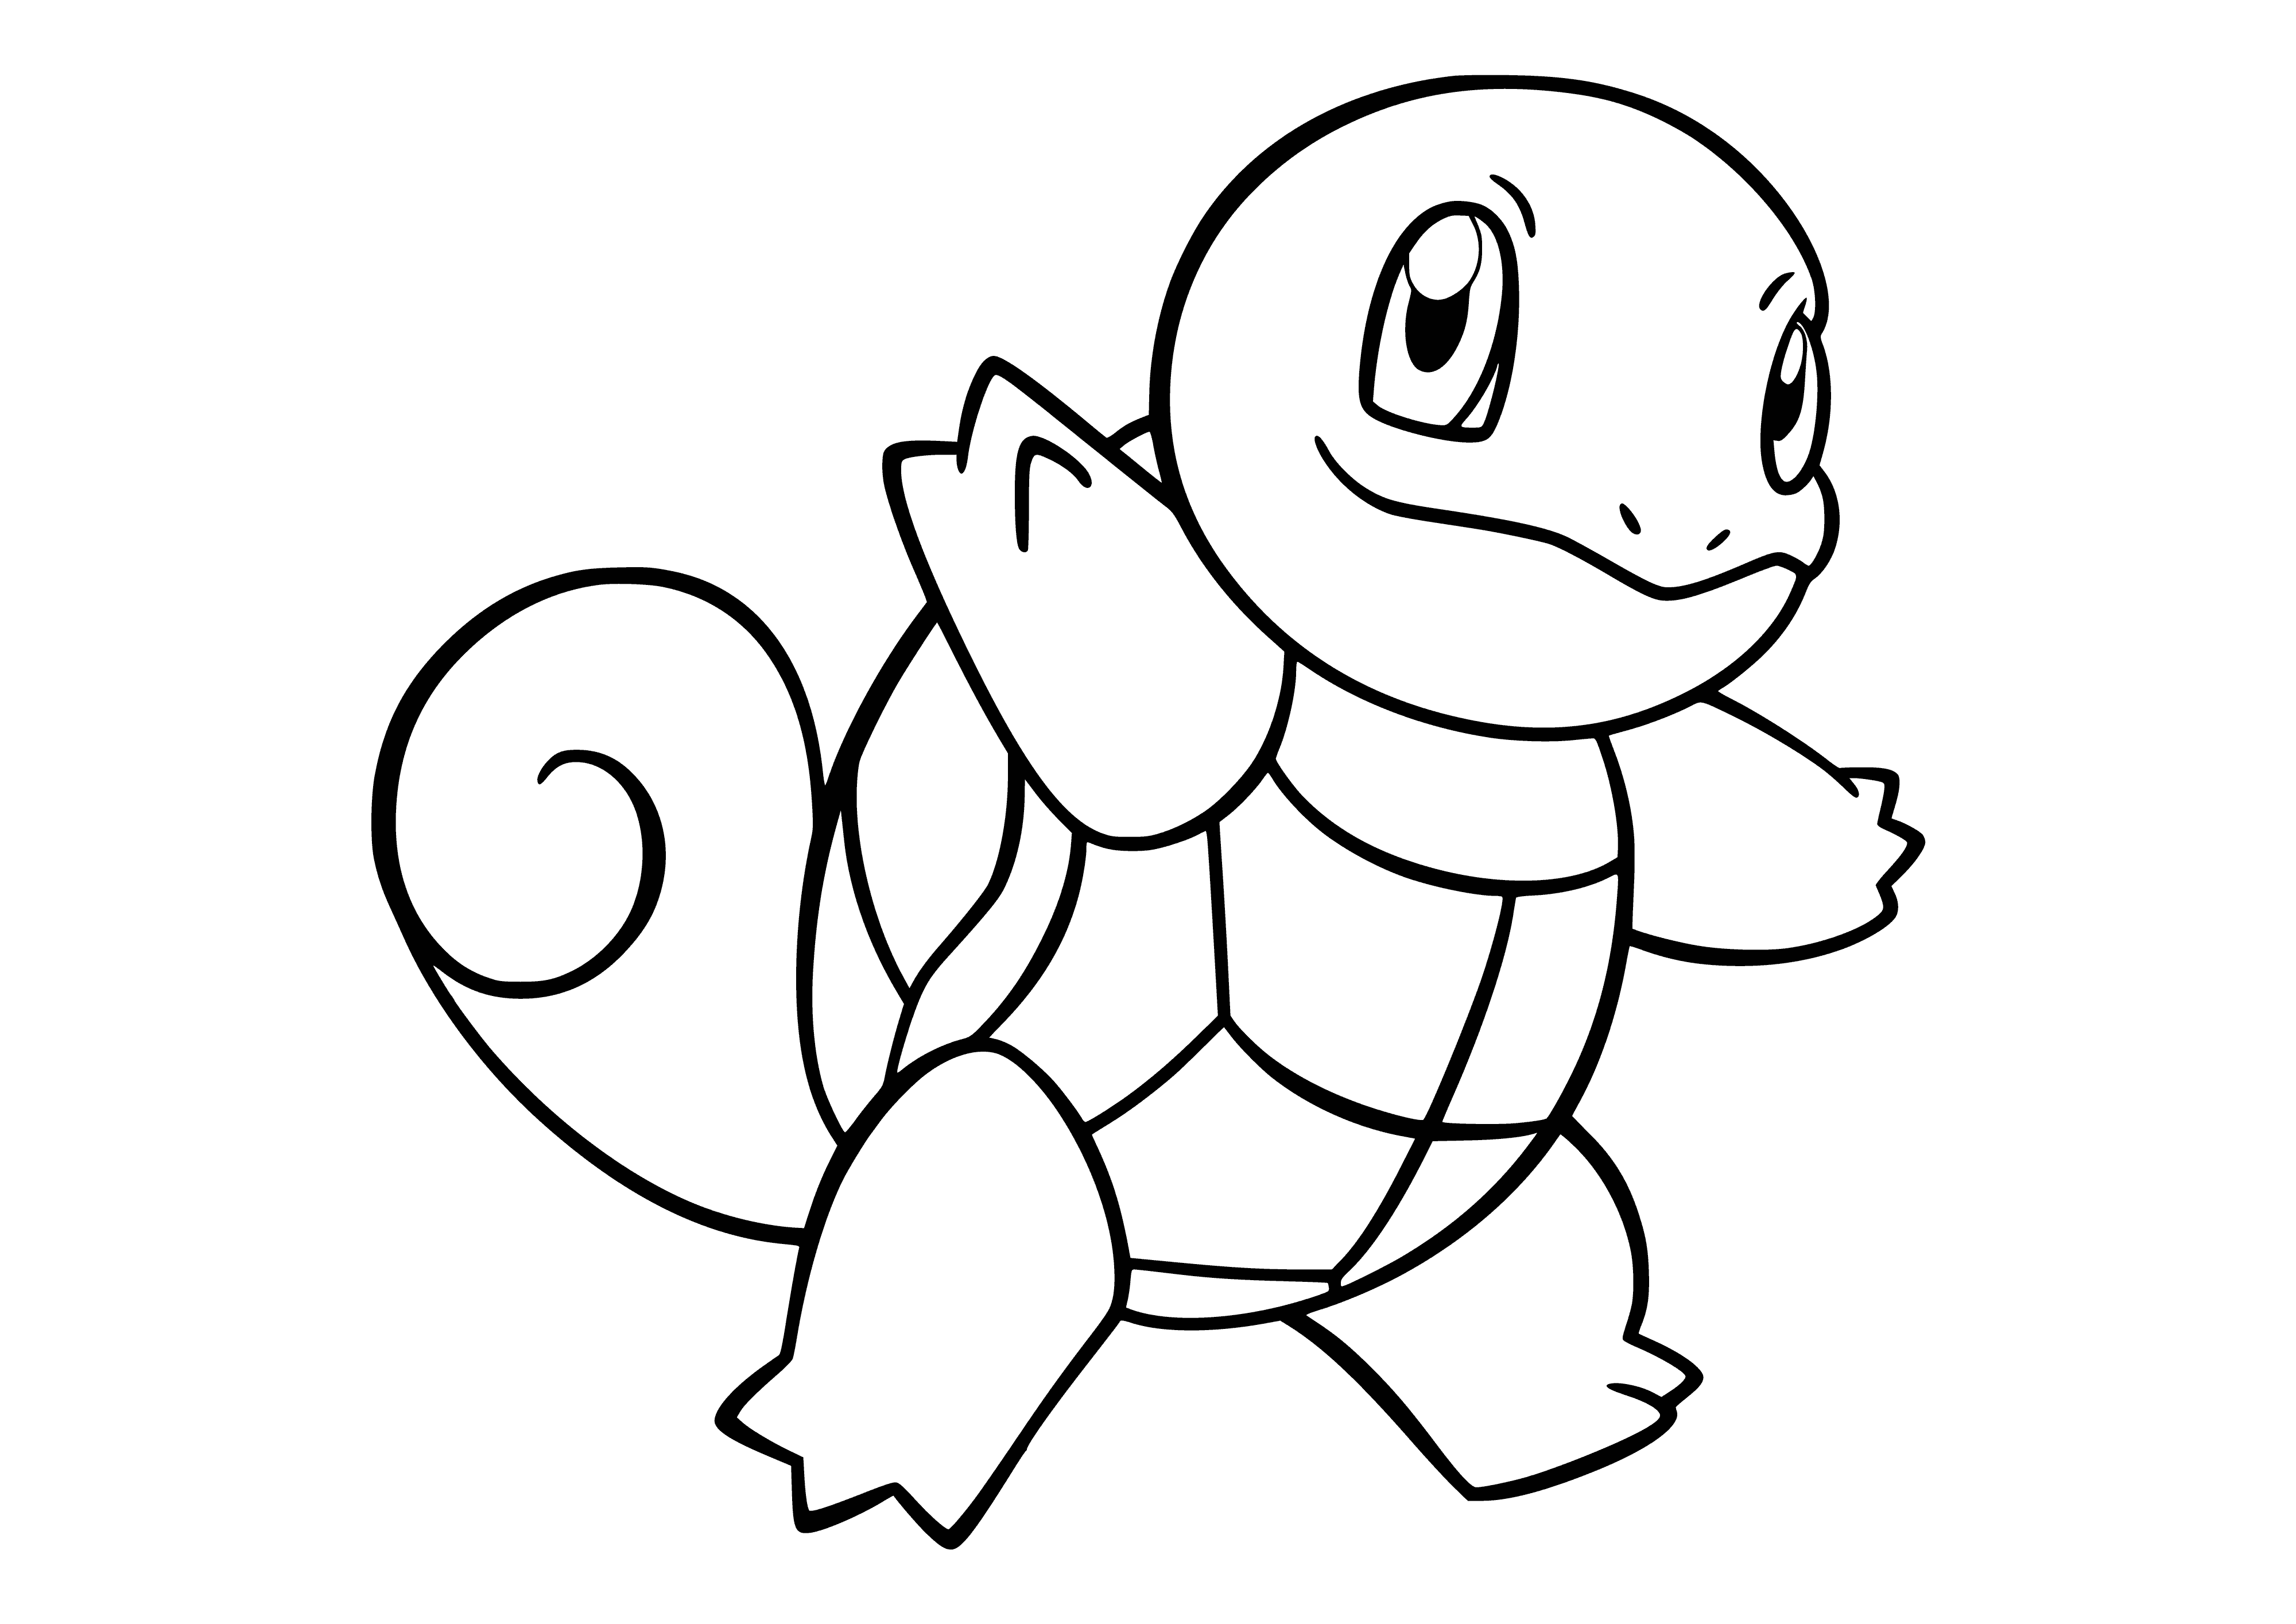 Pokemon Squirtle coloring page